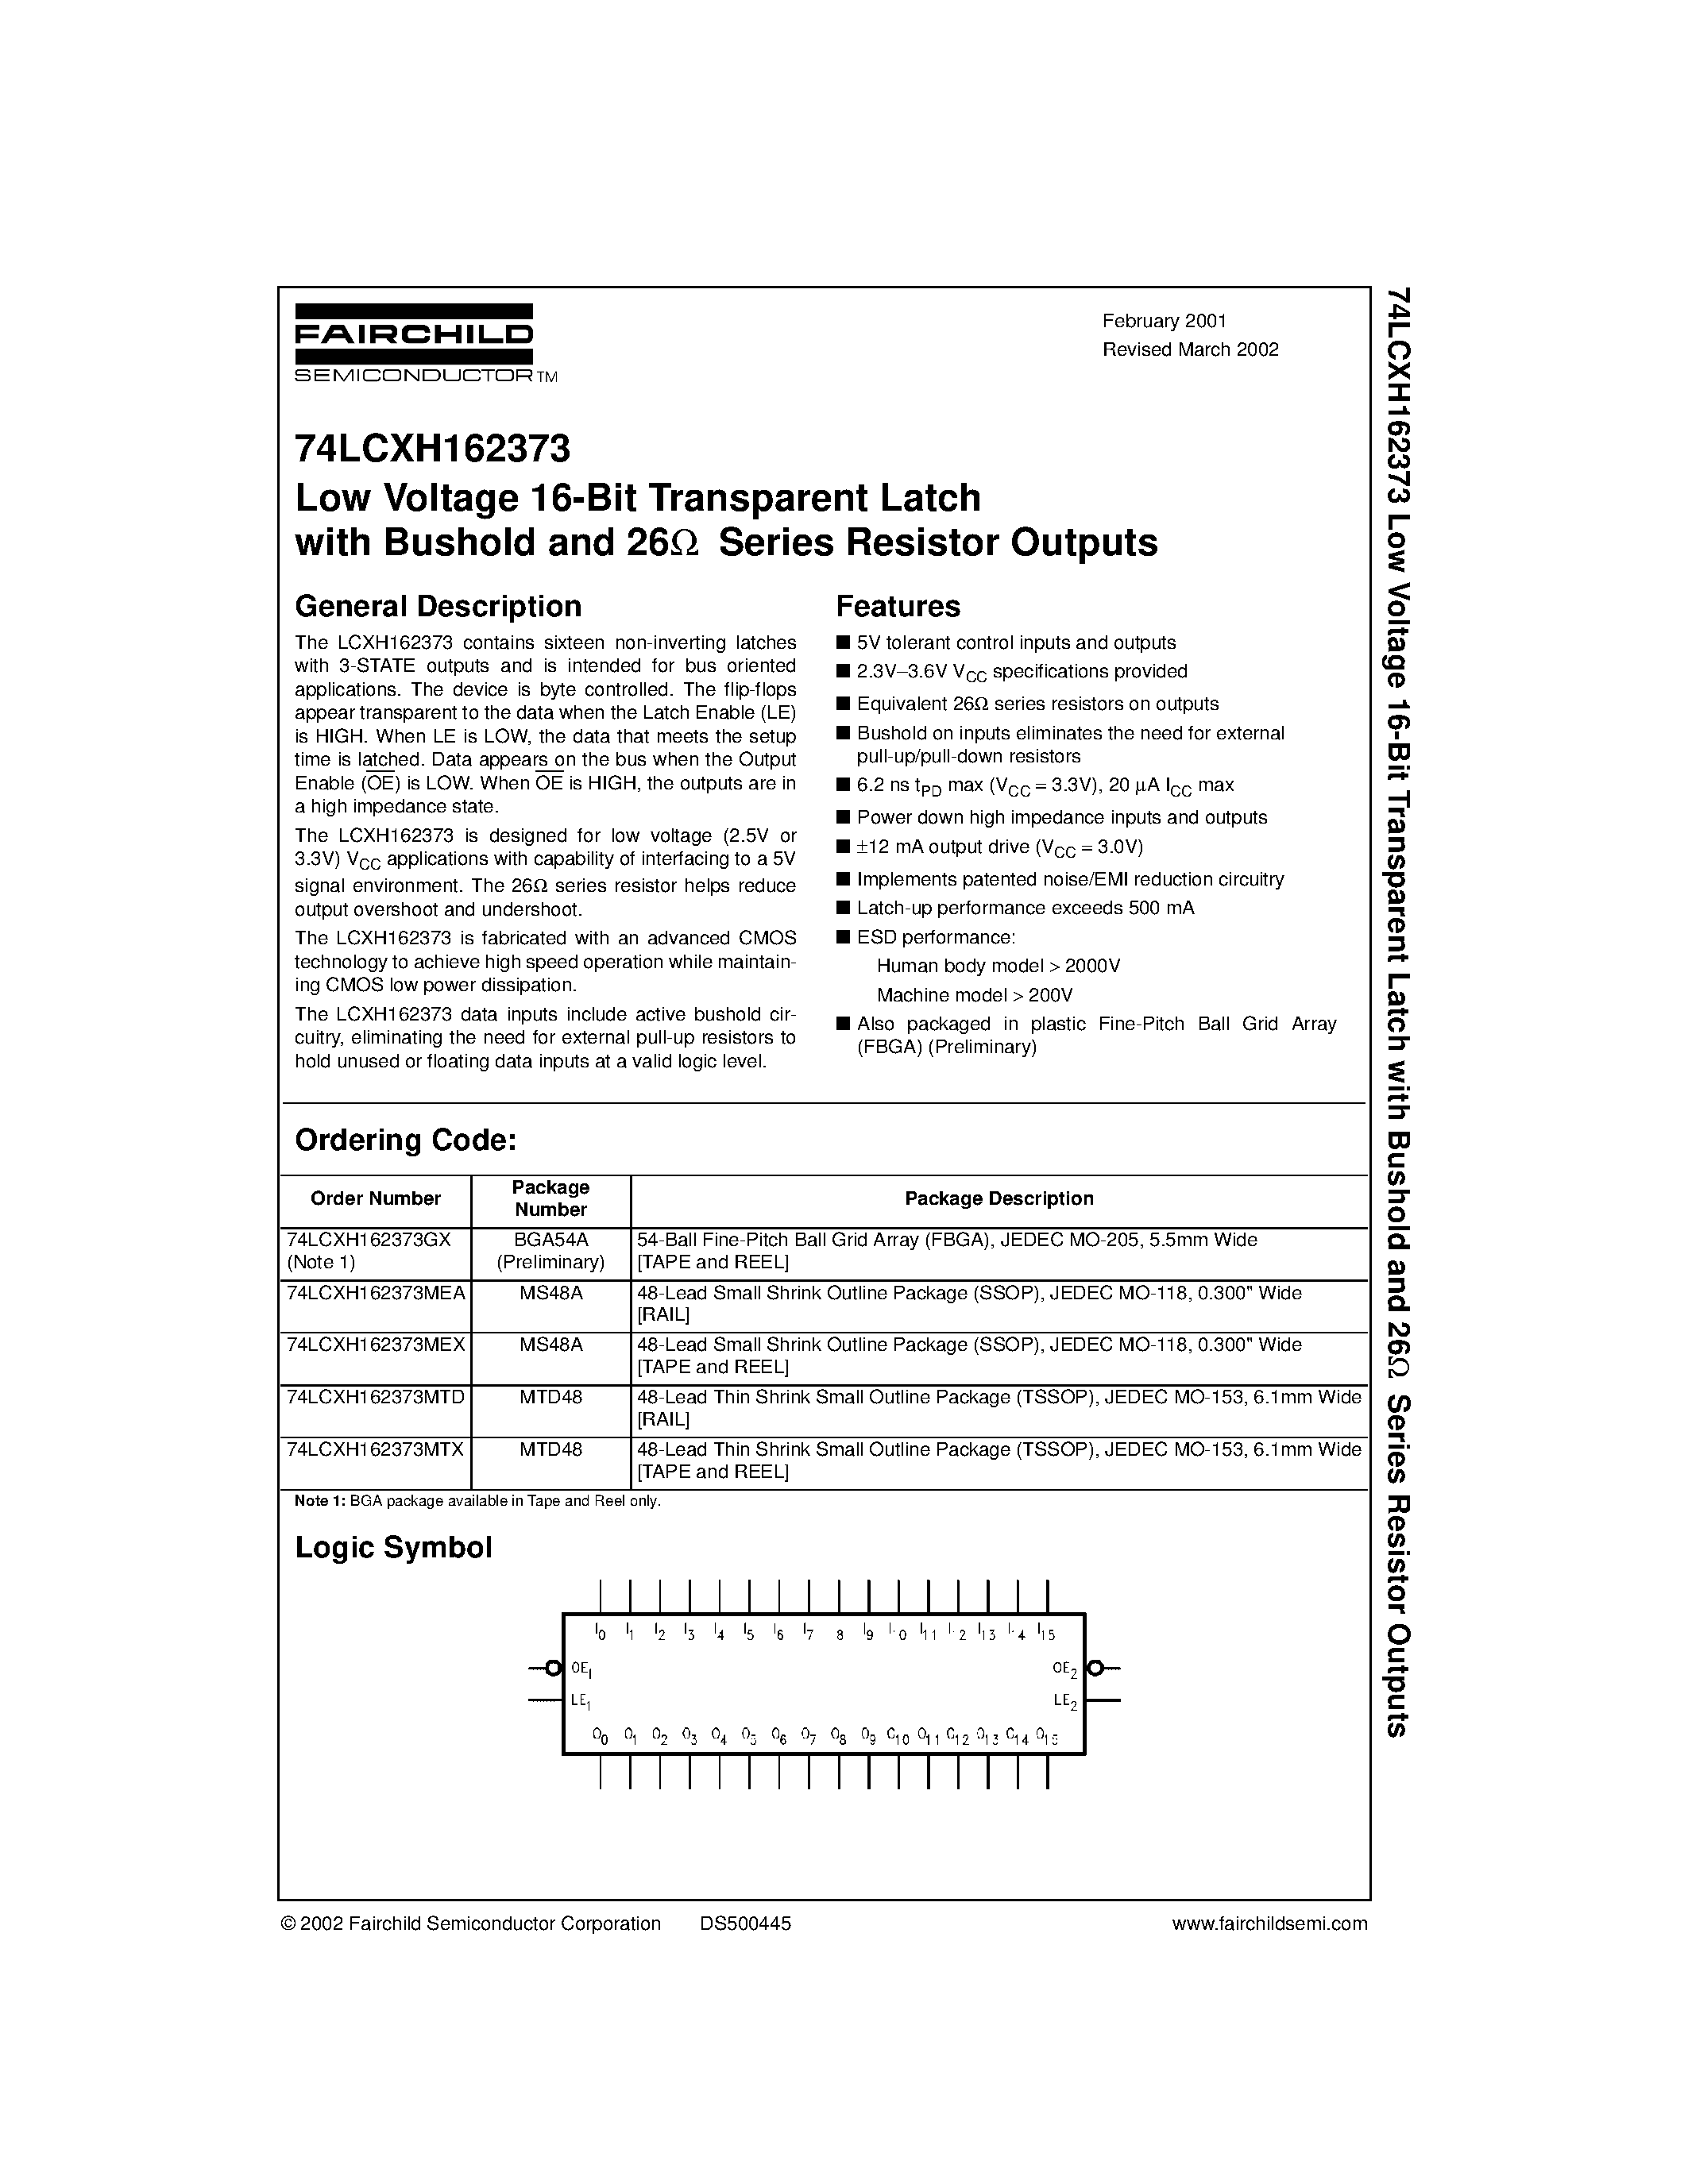 Datasheet 74LCXH162373 - Low Voltage 16-Bit Transparent Latch with Bushold and 26 Series Resistor Outputs page 1